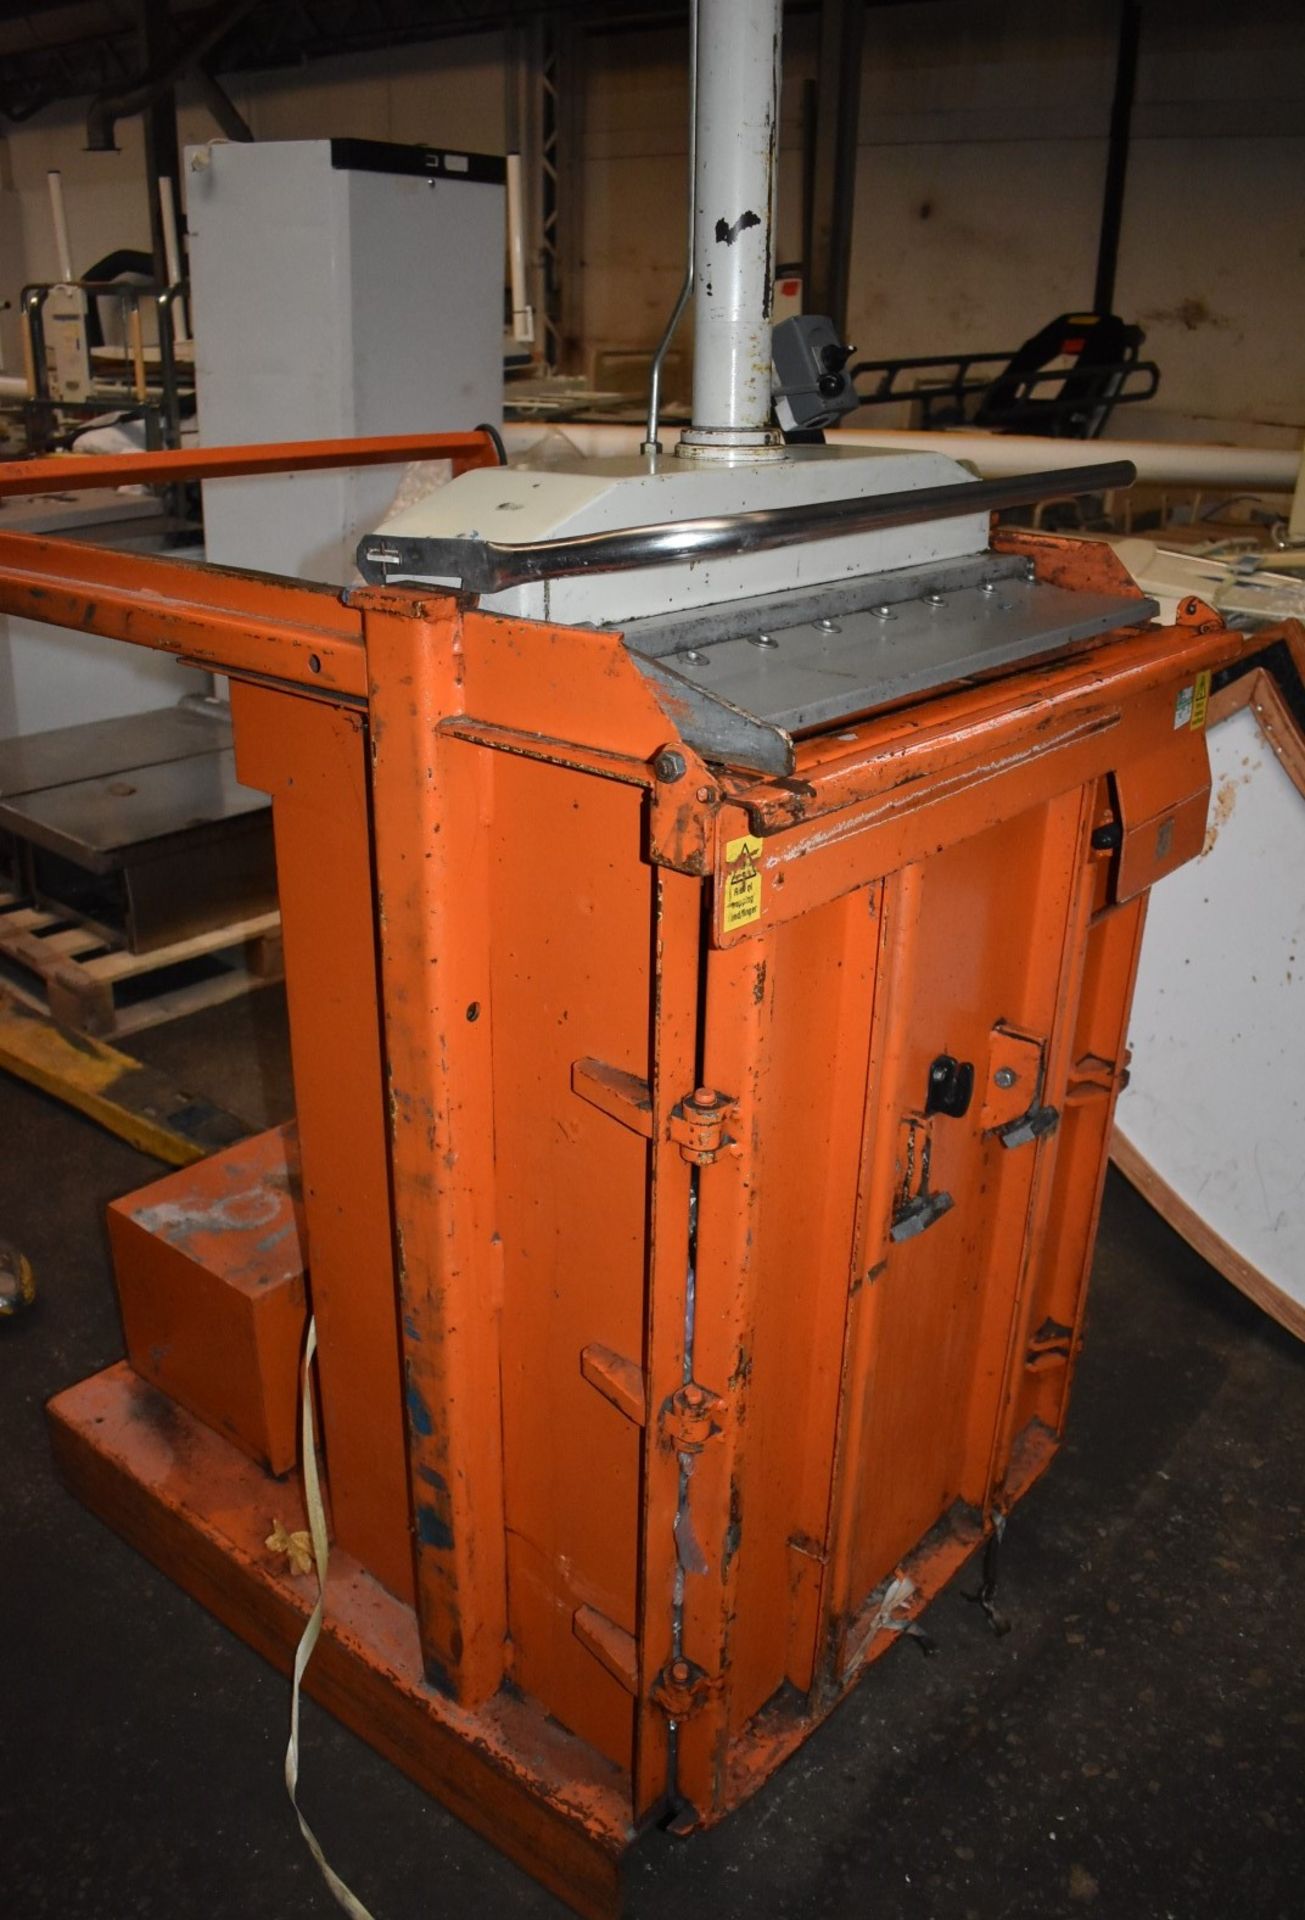 1 x Orwak 5010 Hydraulic Press Compact Cardboard Baler - Used For Compacting Recyclable or Non- - Image 9 of 15